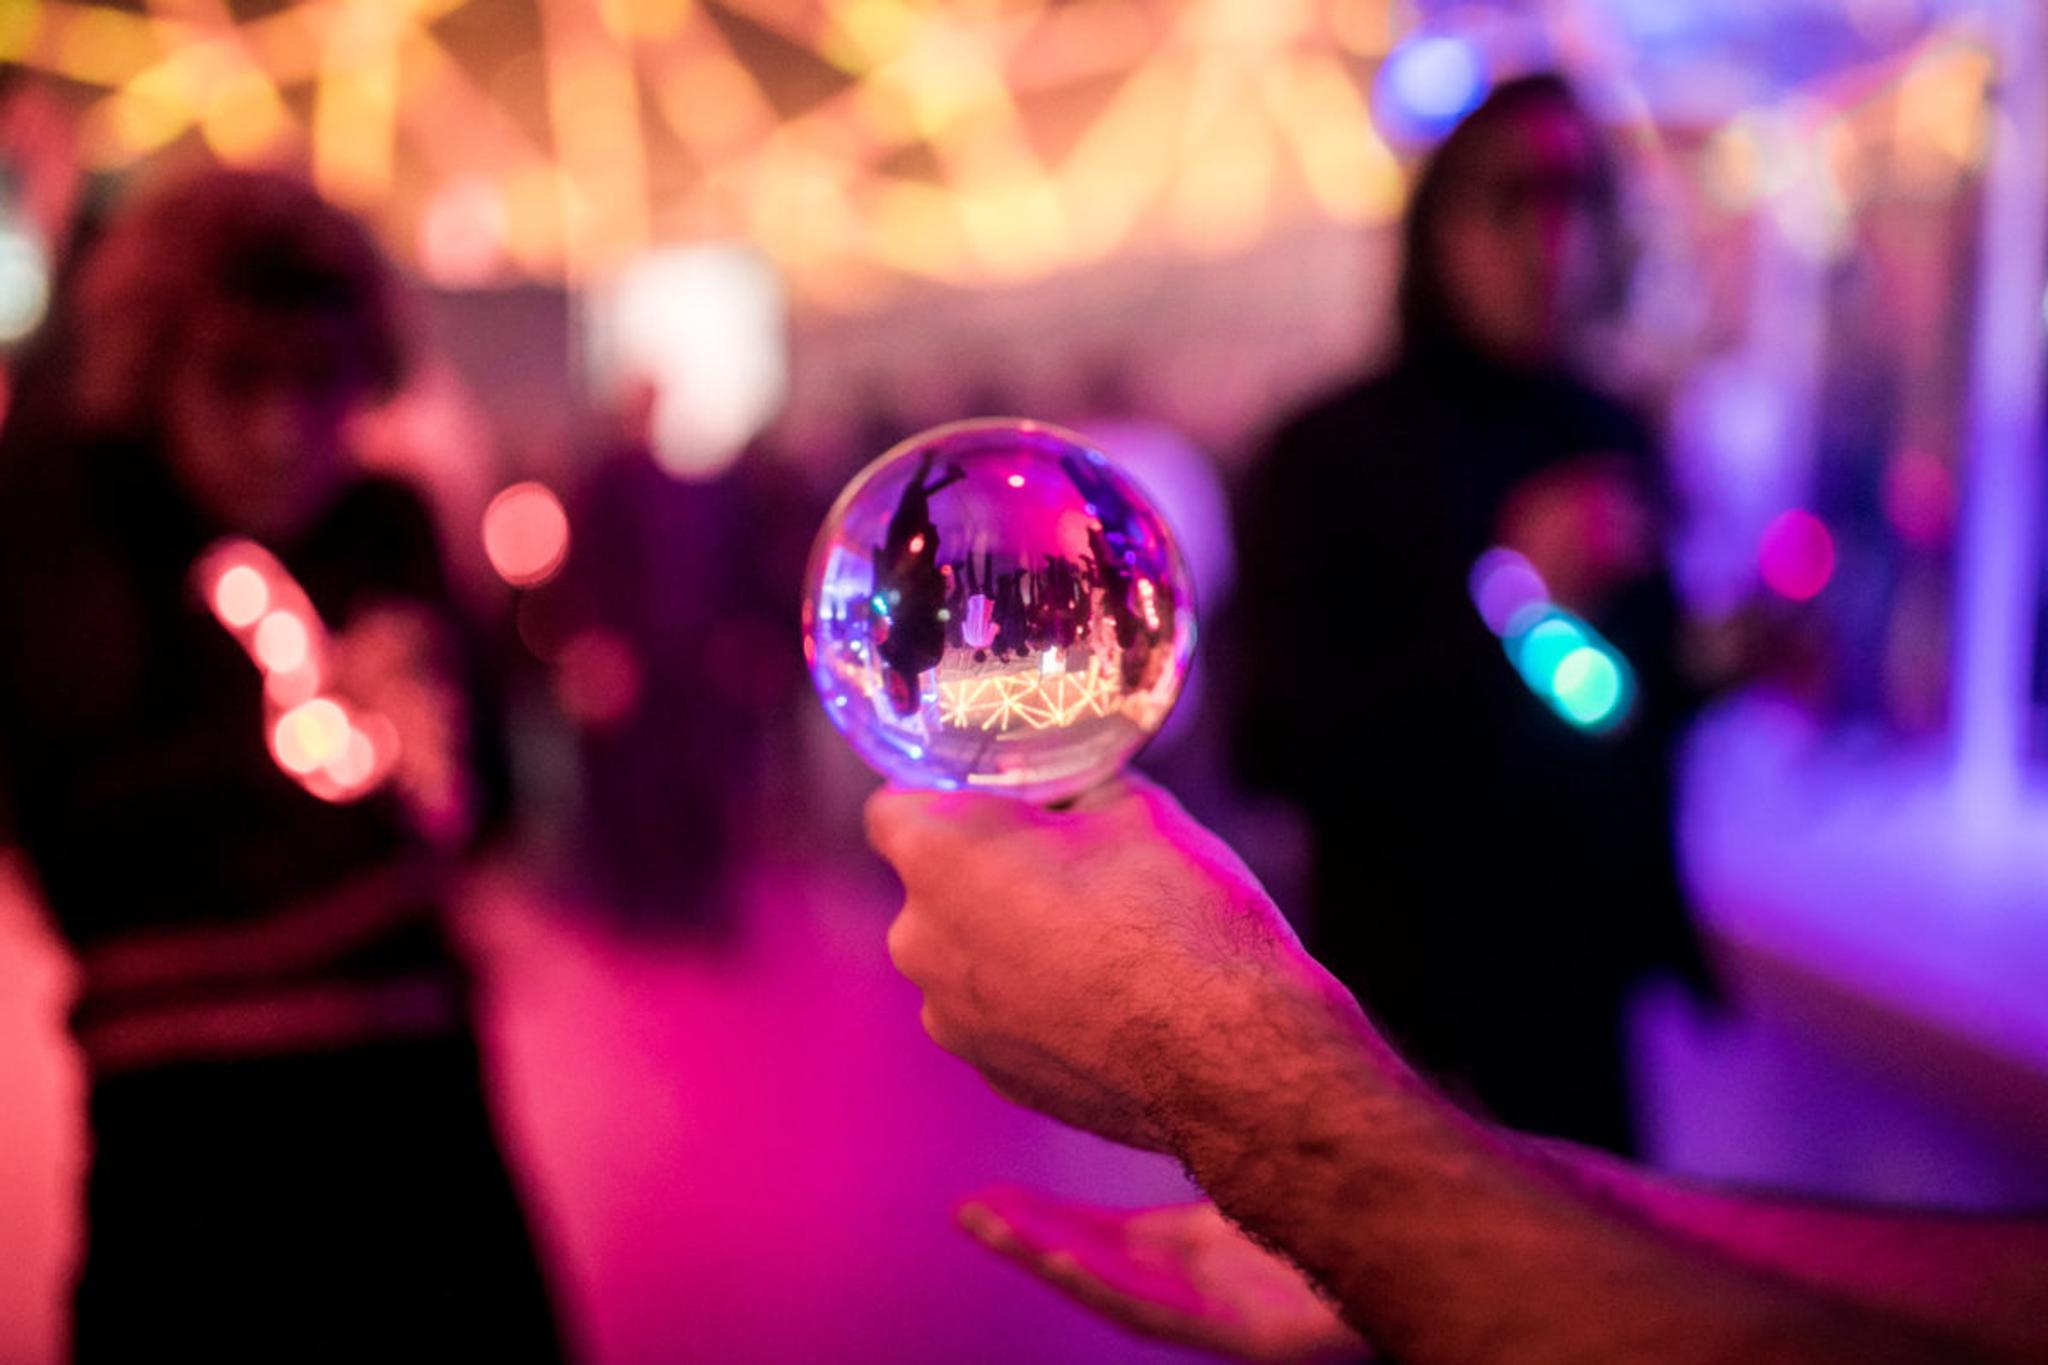 A performer holds a glass ball in their hand.